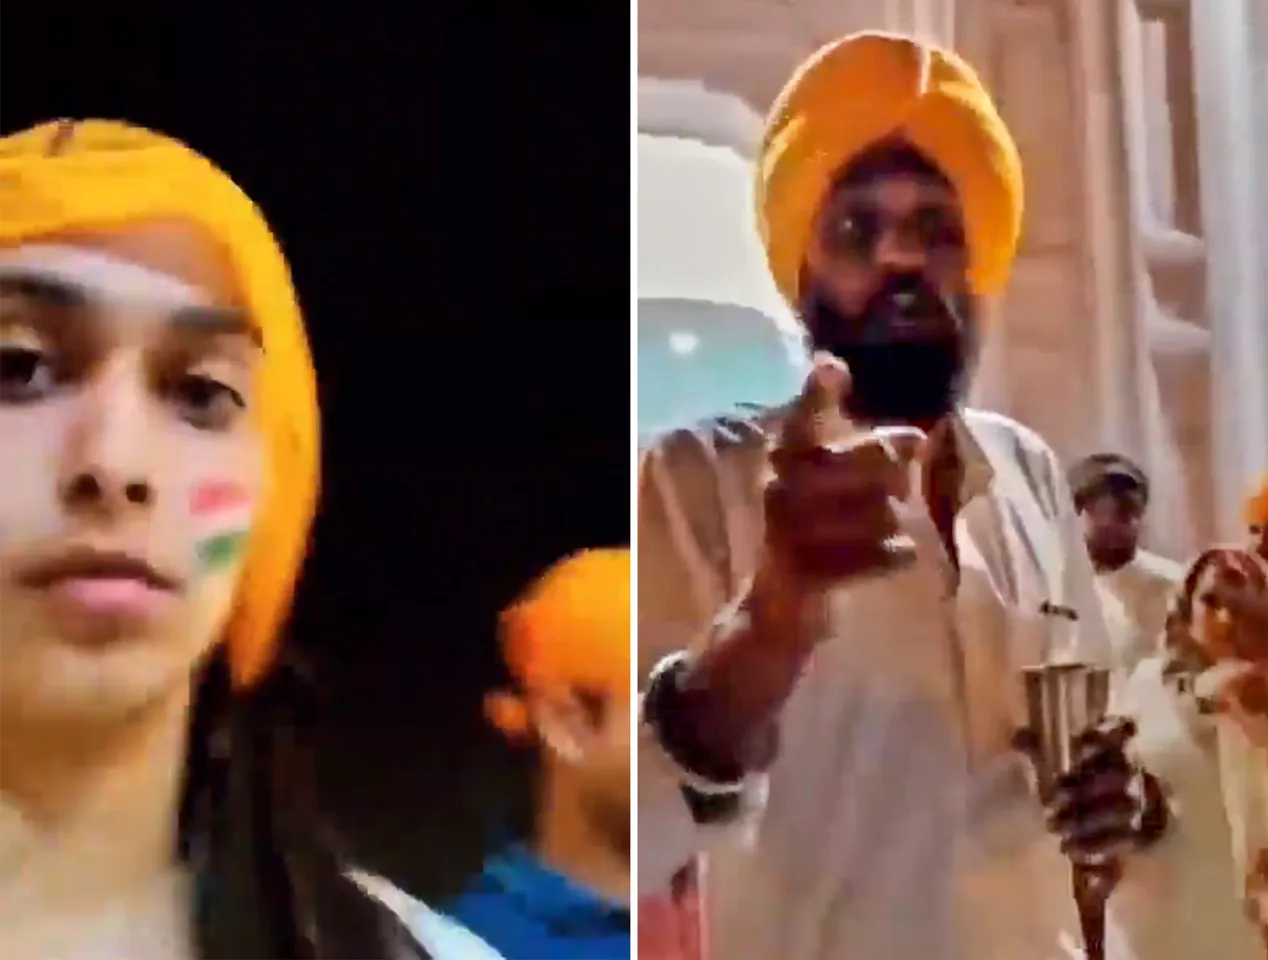 “This is Punjab, Not India,” girl wearing tricolour on cheek denied entry to Golden Temple